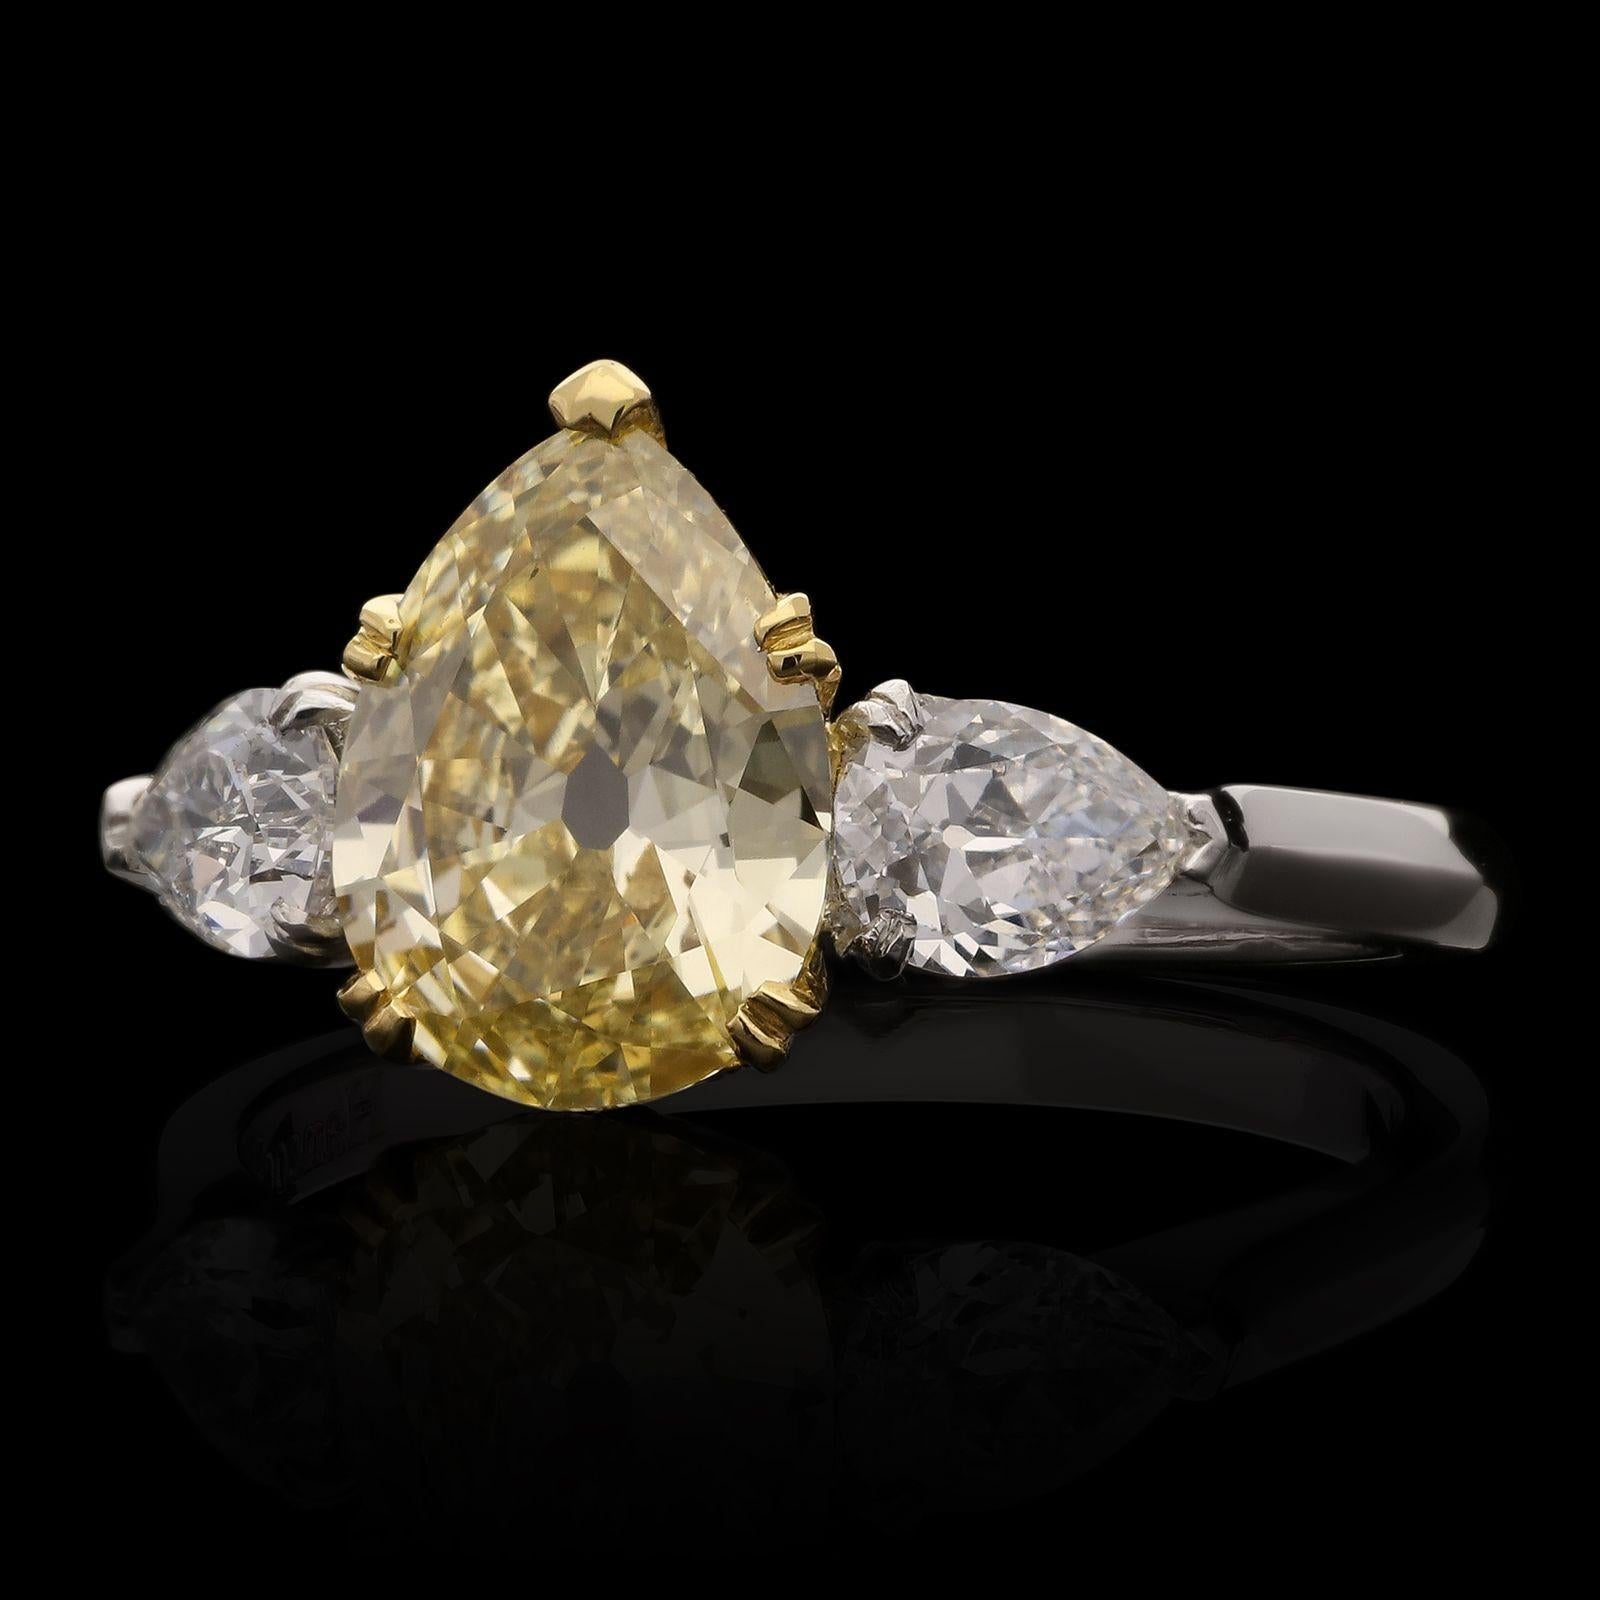 A beautiful fancy colour diamond ring by Hancocks, set with an old-cut pear-shaped diamond weighing 1.49ct and of Fancy Yellow colour and VS2 clarity, in an 18ct yellow gold double claw setting between shoulders of pear shaped diamonds set